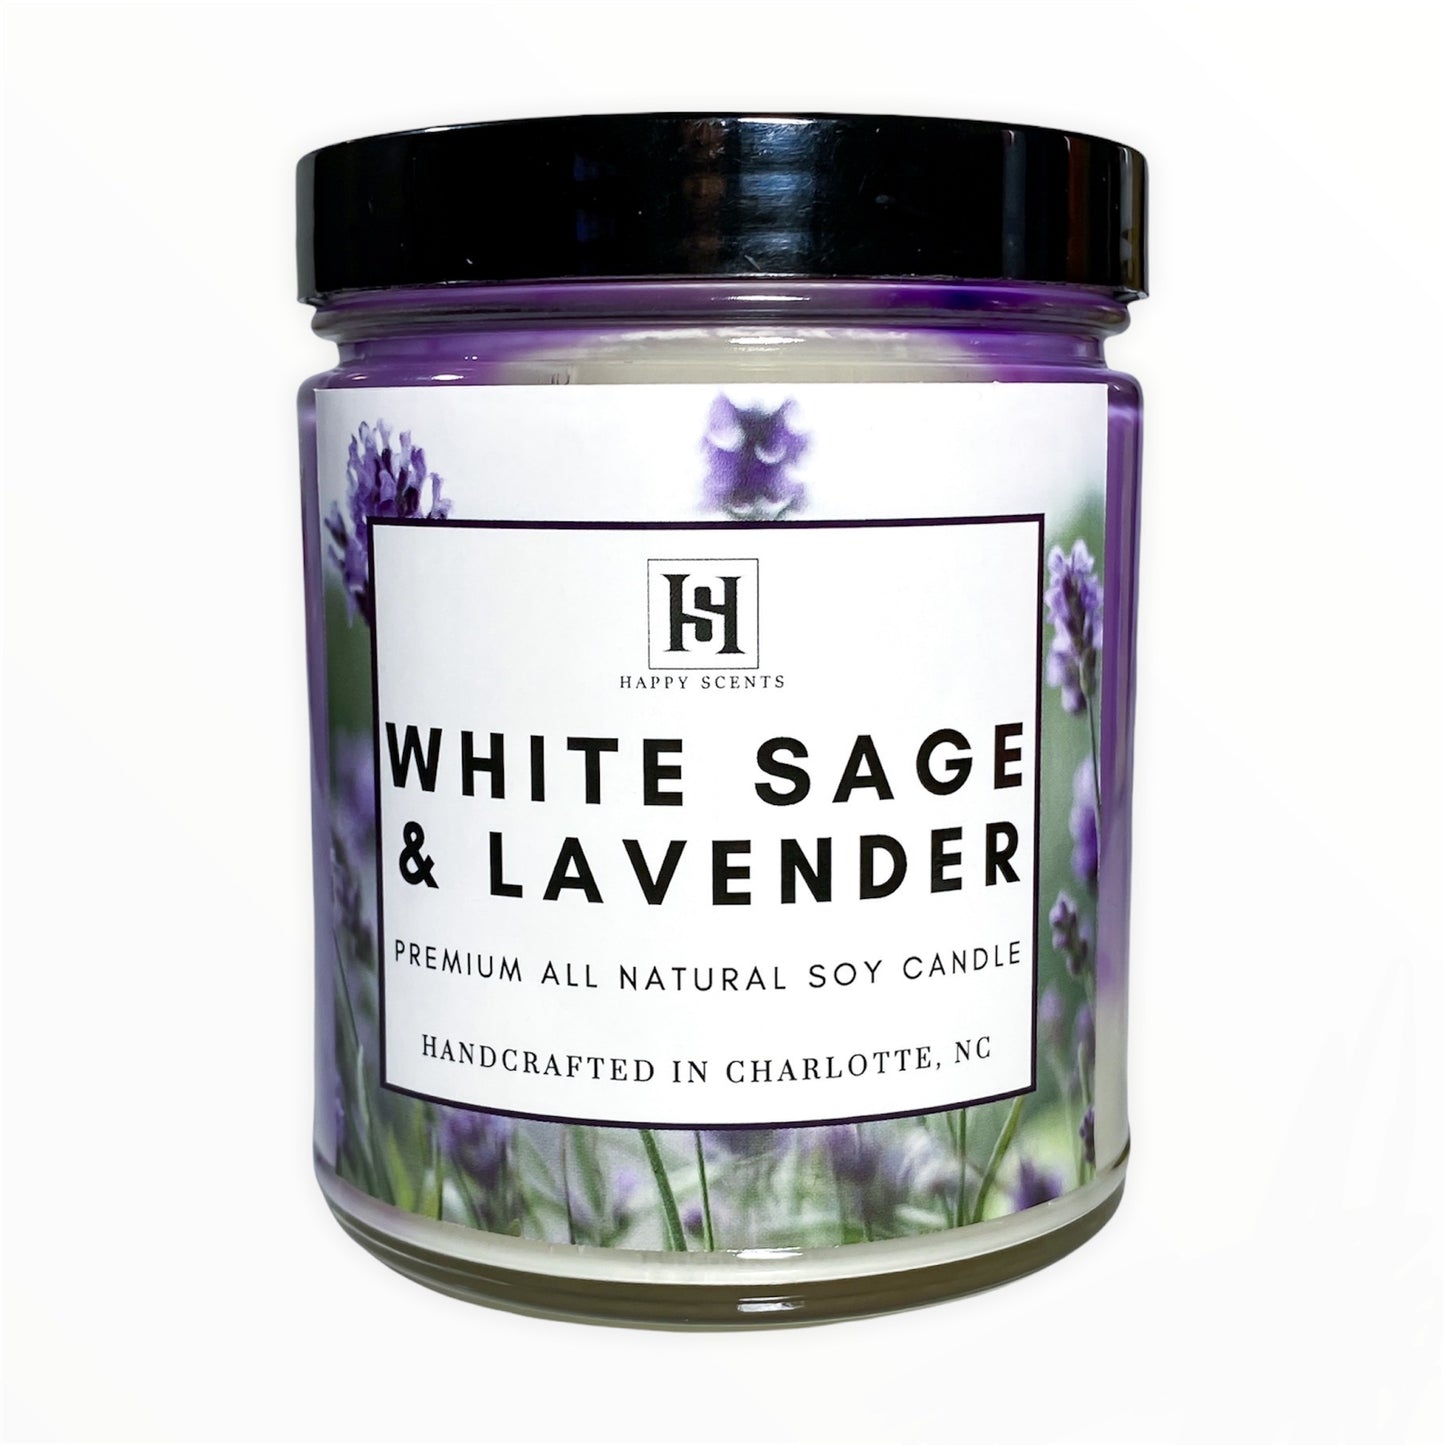 White Sage & Lavender scented soy candle